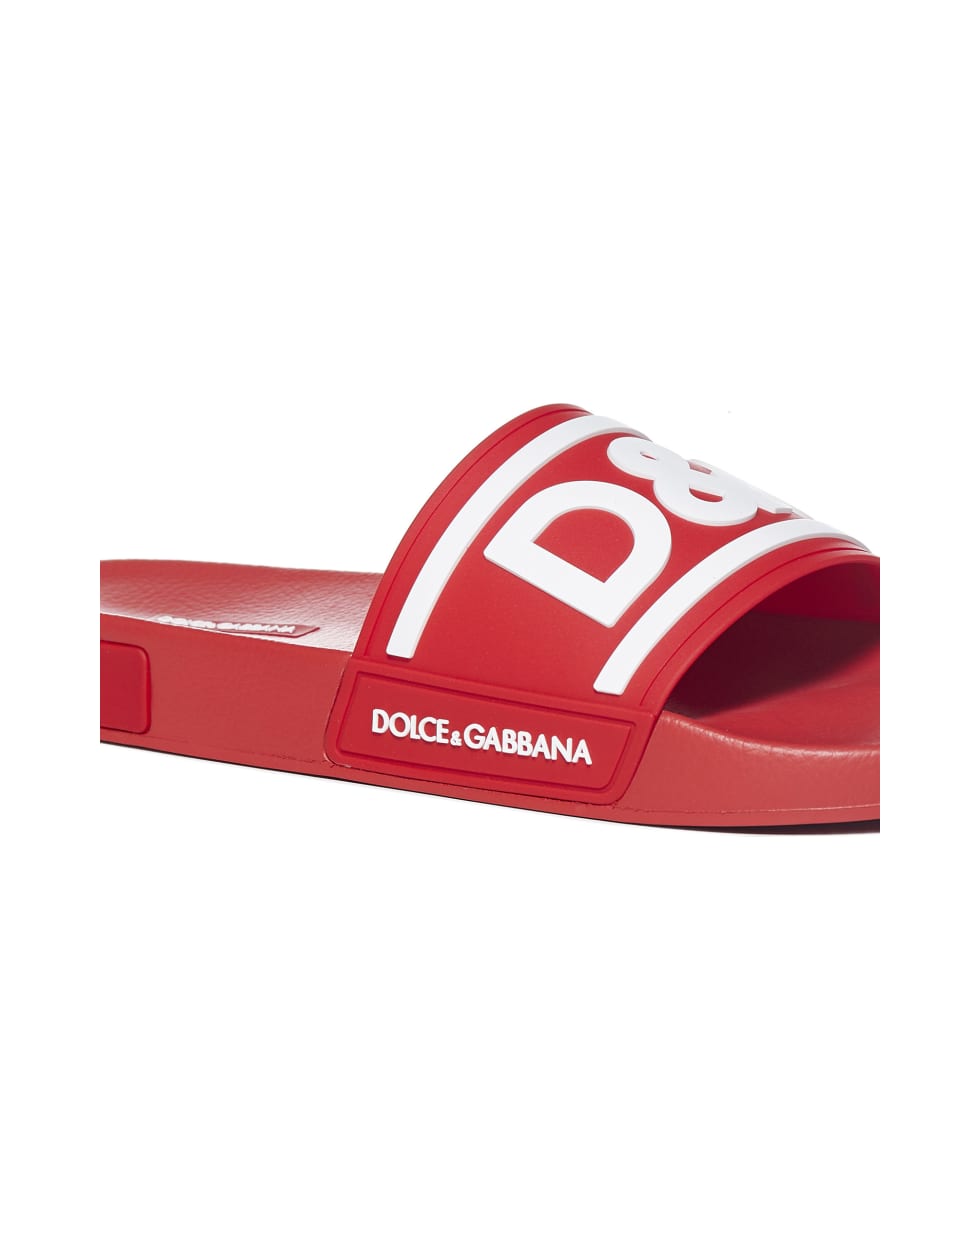 Dolce & Gabbana Shoes - Rosso bianco